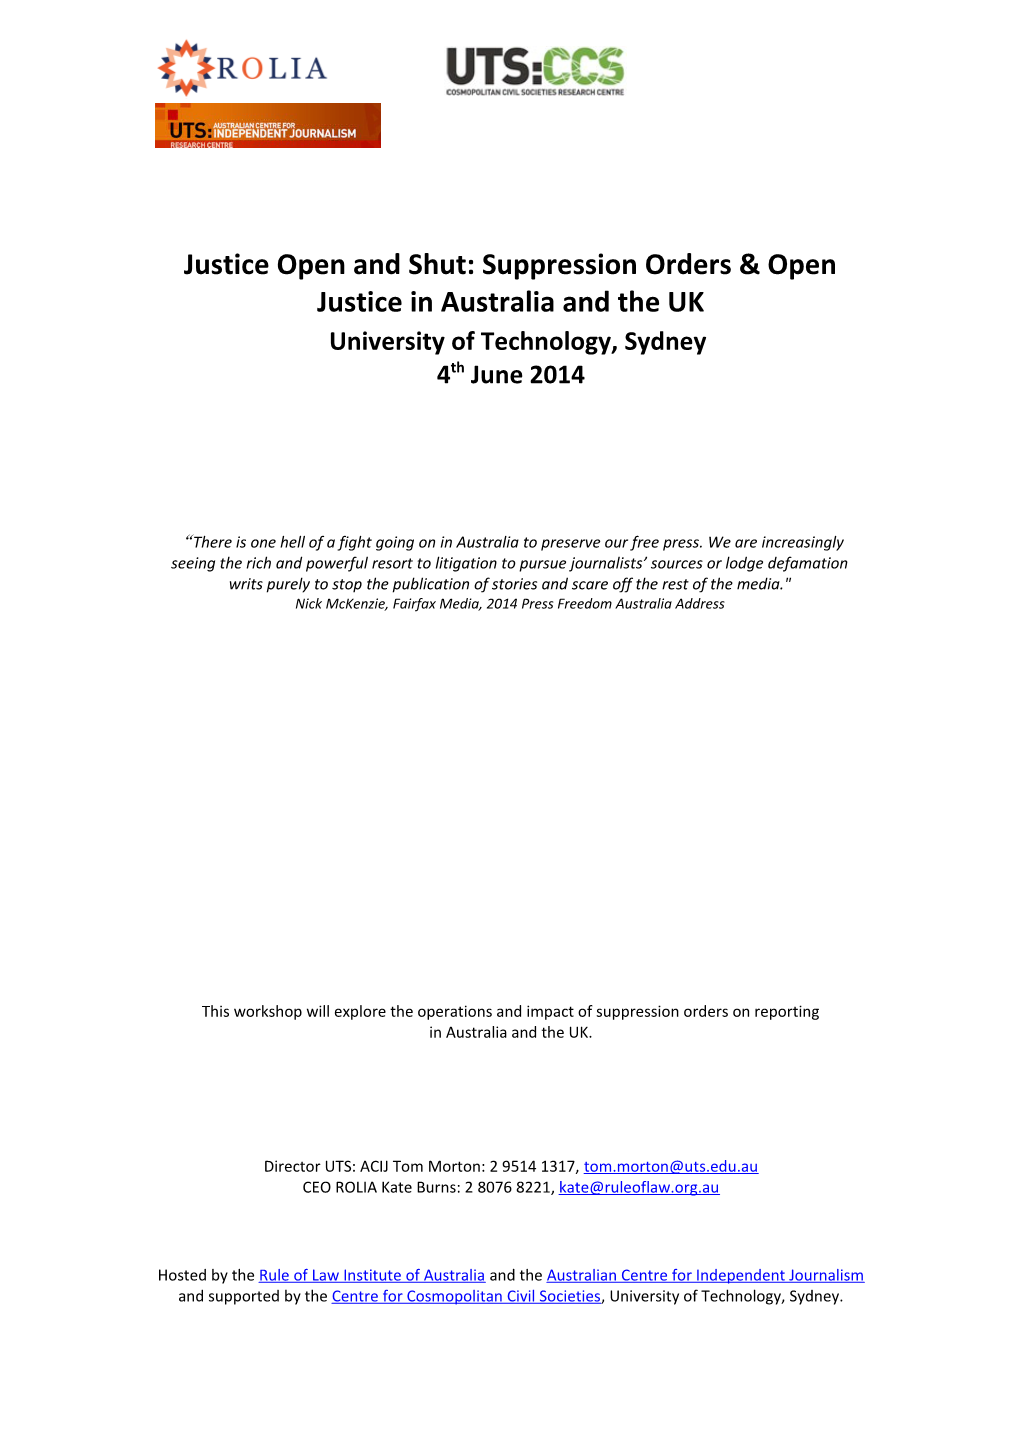 Justice Open and Shut: Suppression Orders & Open Justice in Australia and the UK